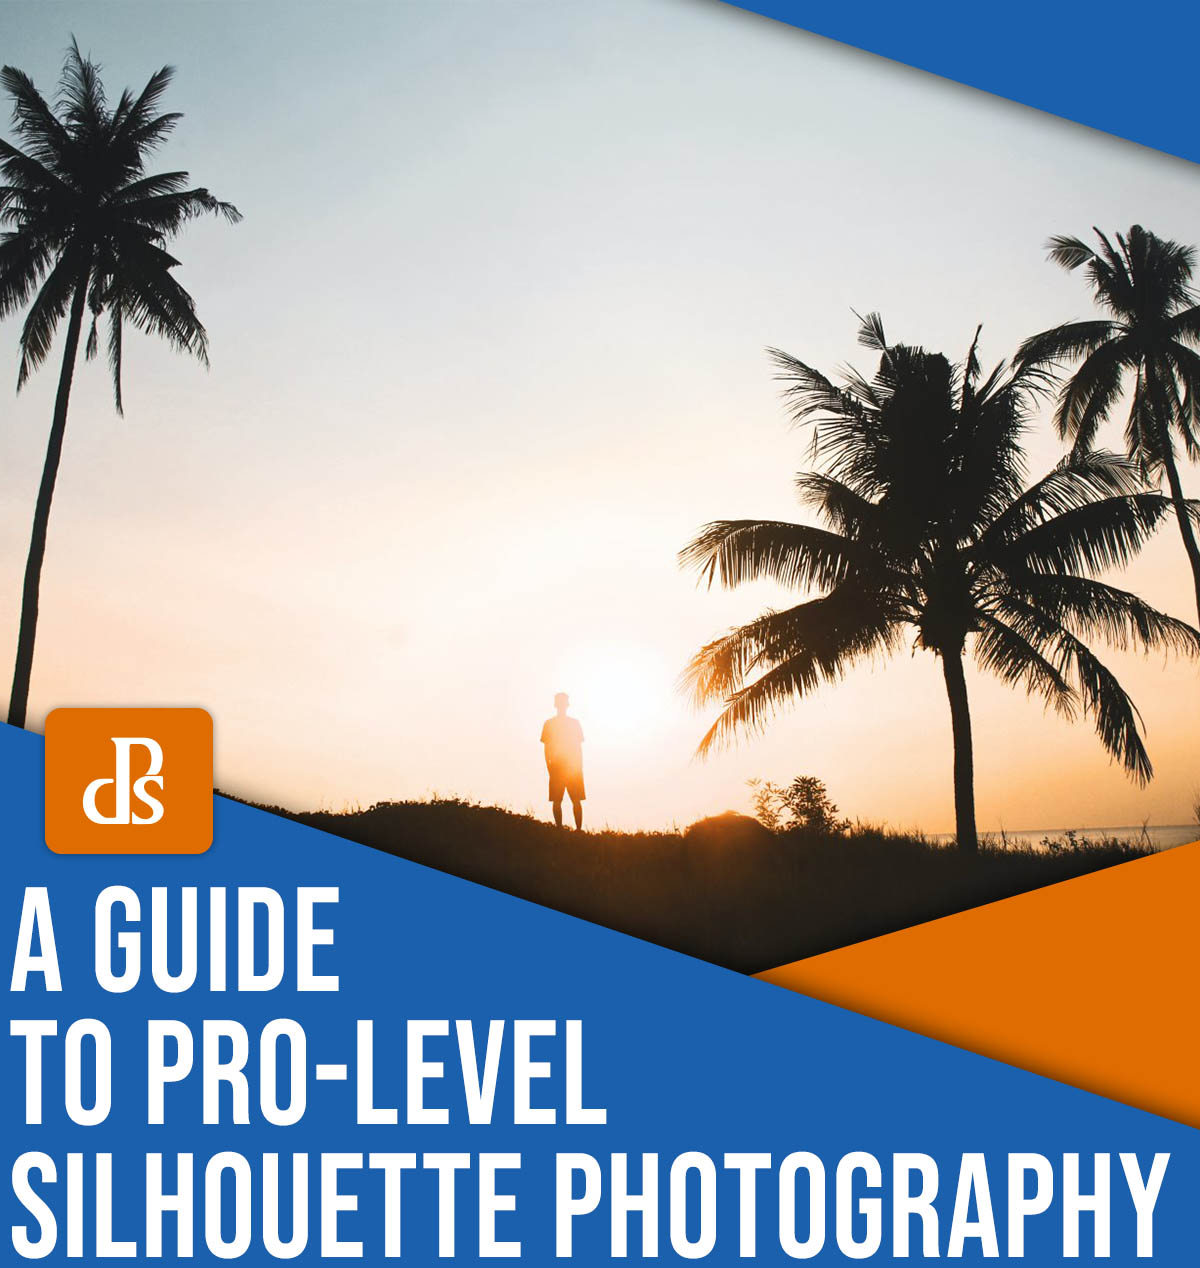 A guide to pro-level silhouette photography